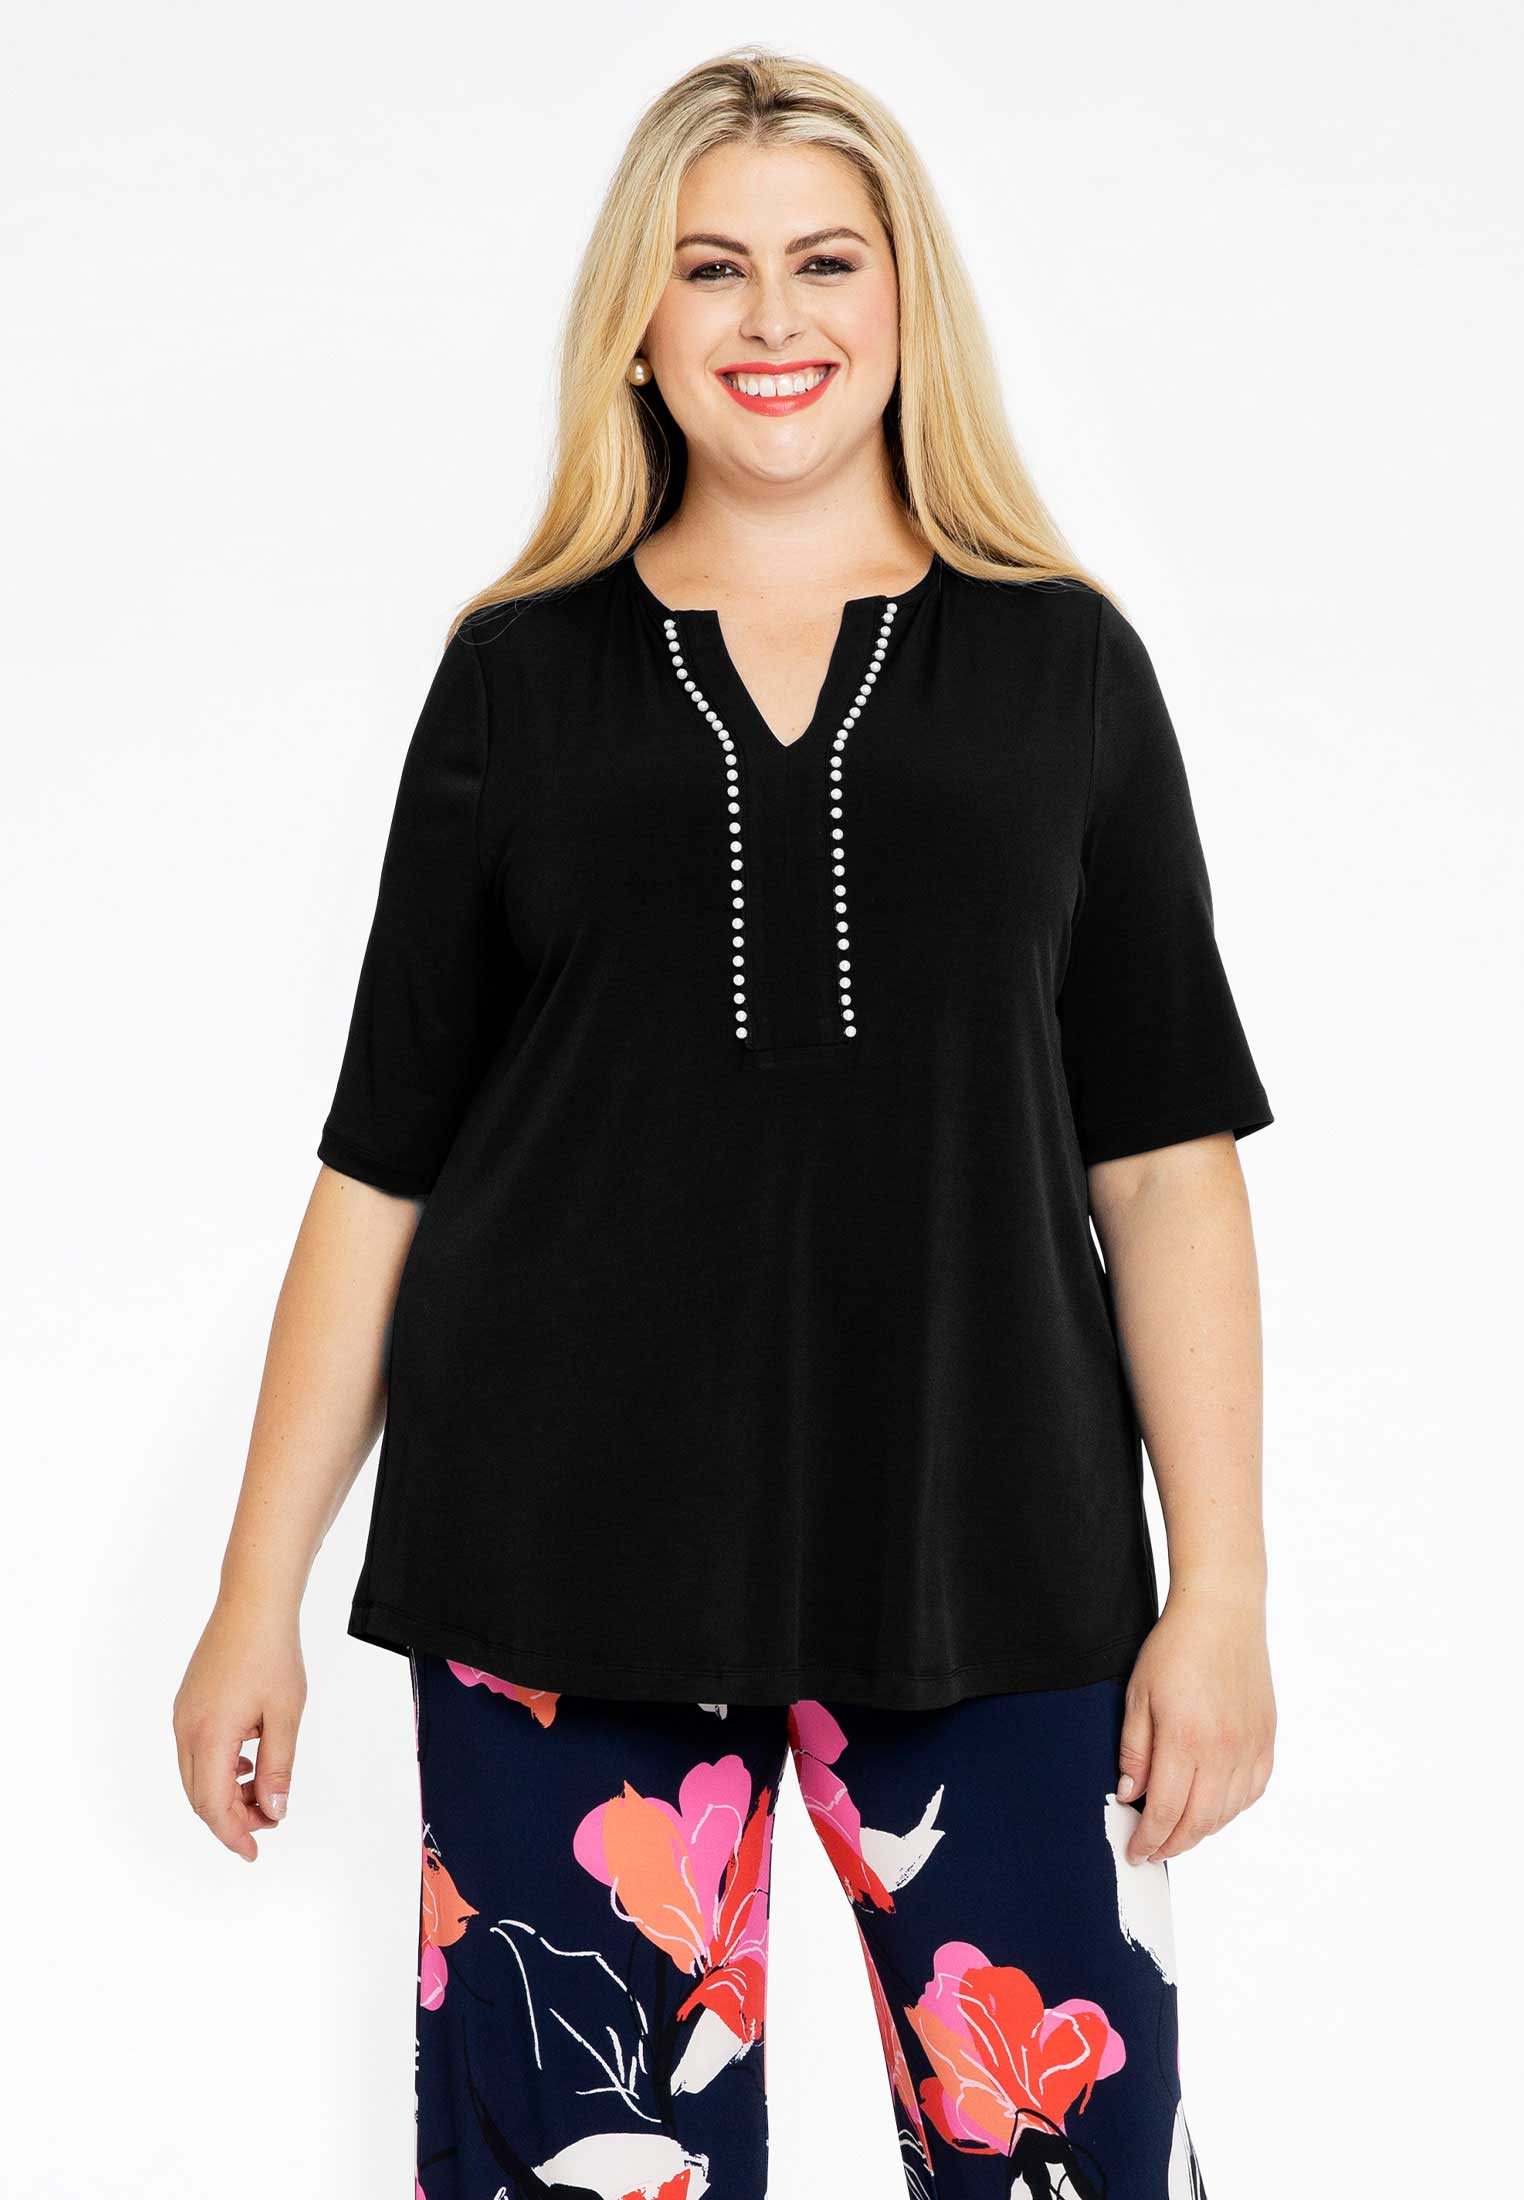 Tunic A-line pearls DOLCE - black blue